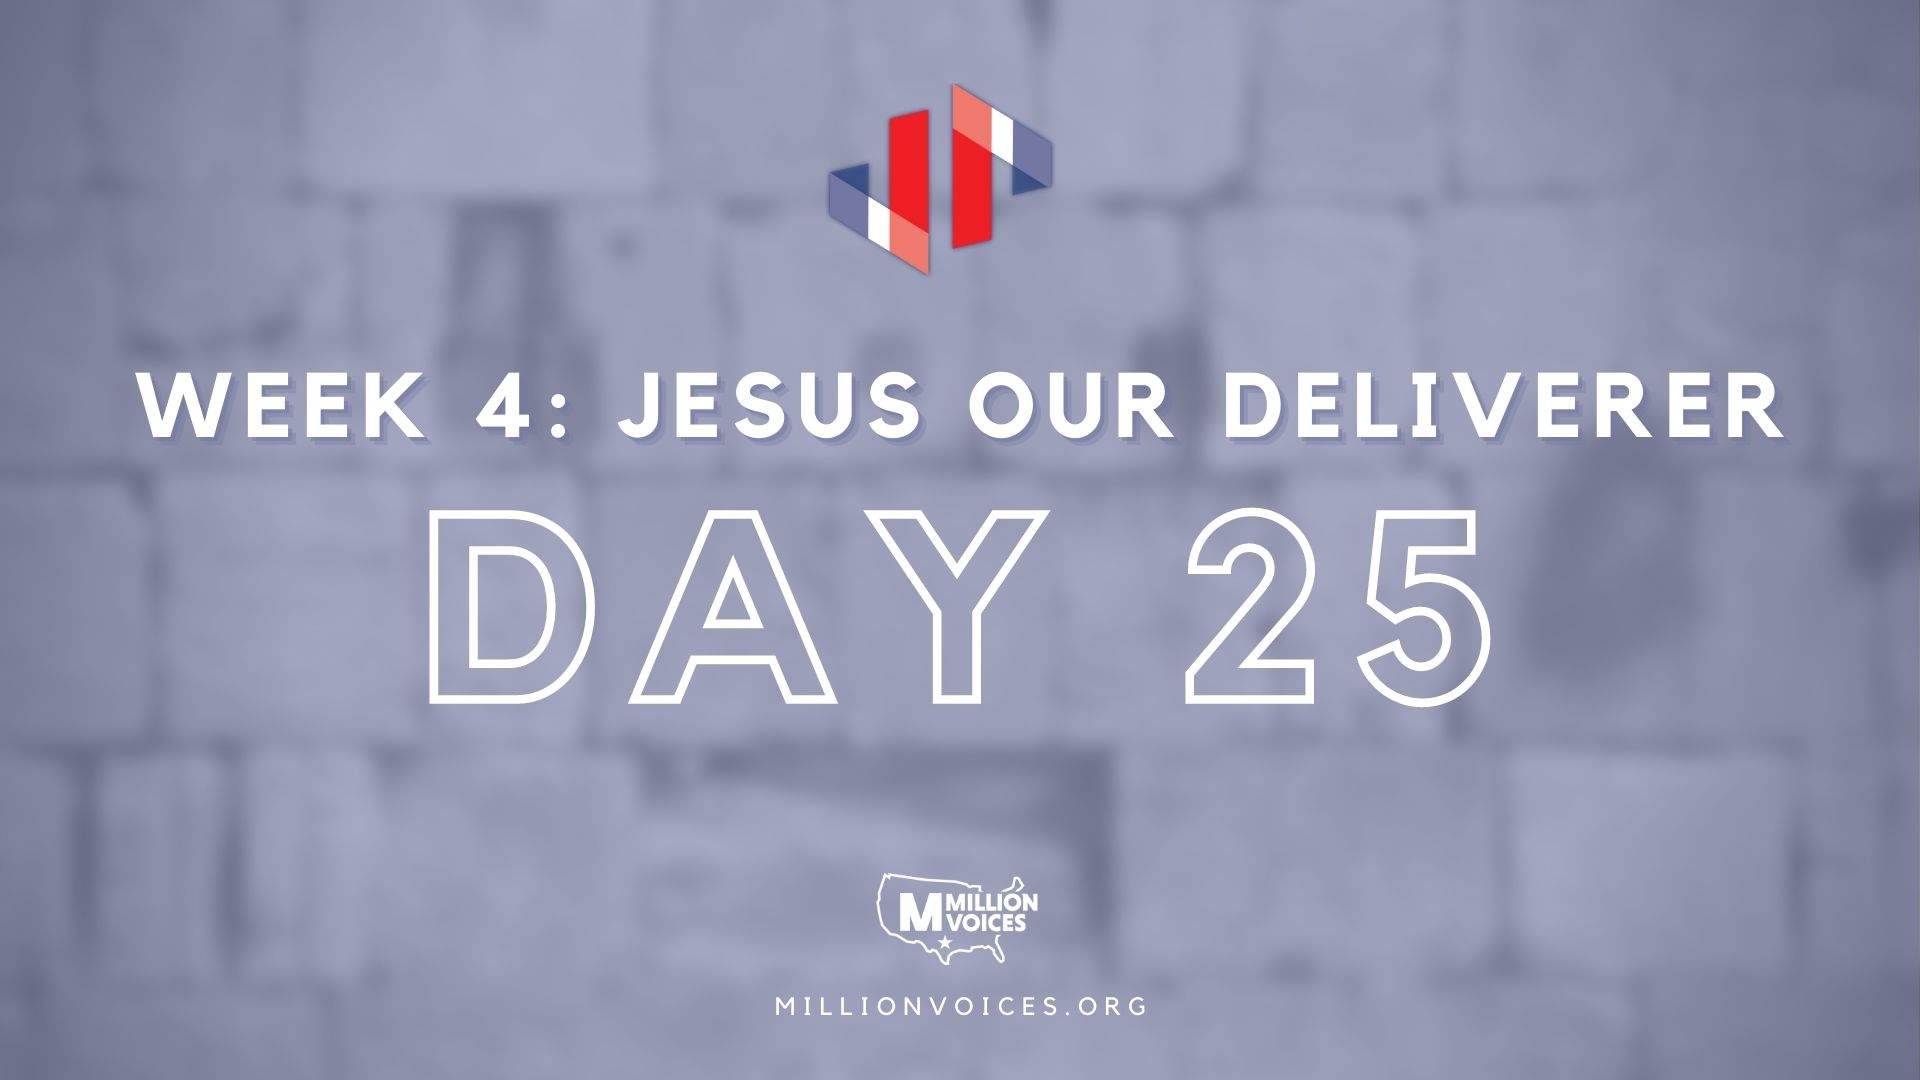 Million Voices - Pause to Pray Images Day 25